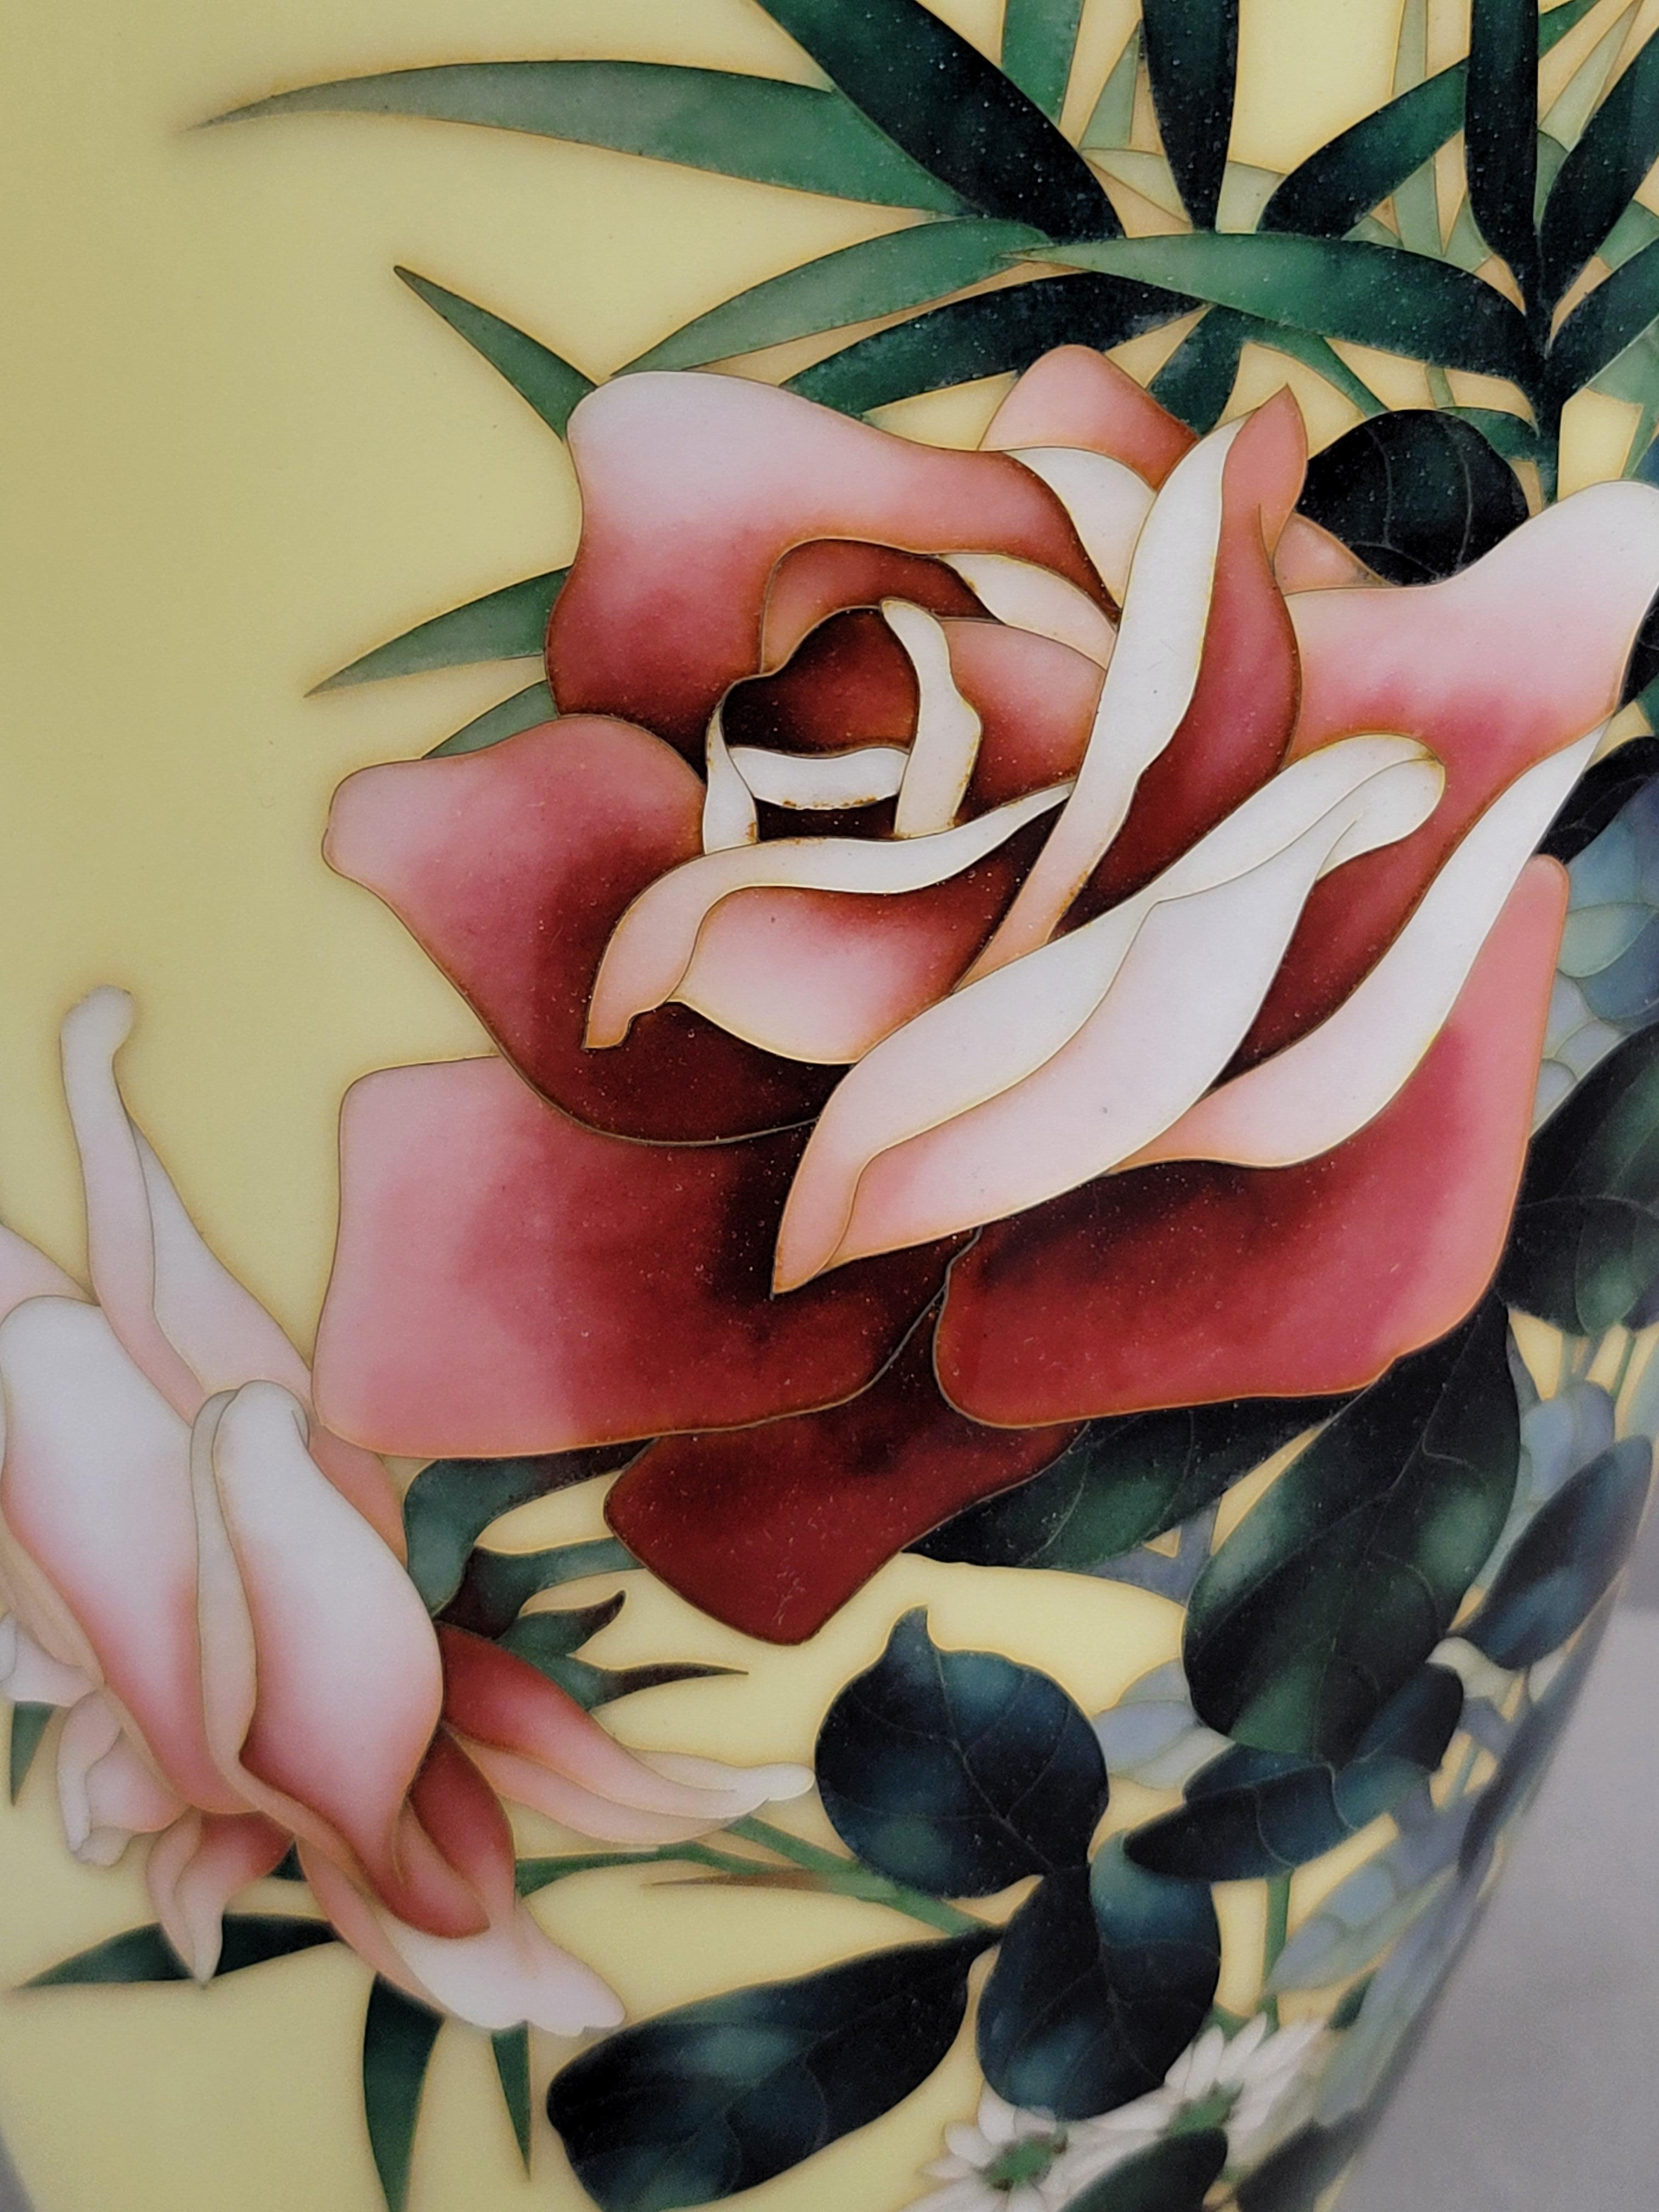 Vintage Japanese Ando Jubei (1876-1956) Signed Cloisonné Vase With Roses In Good Condition For Sale In Centennial, CO